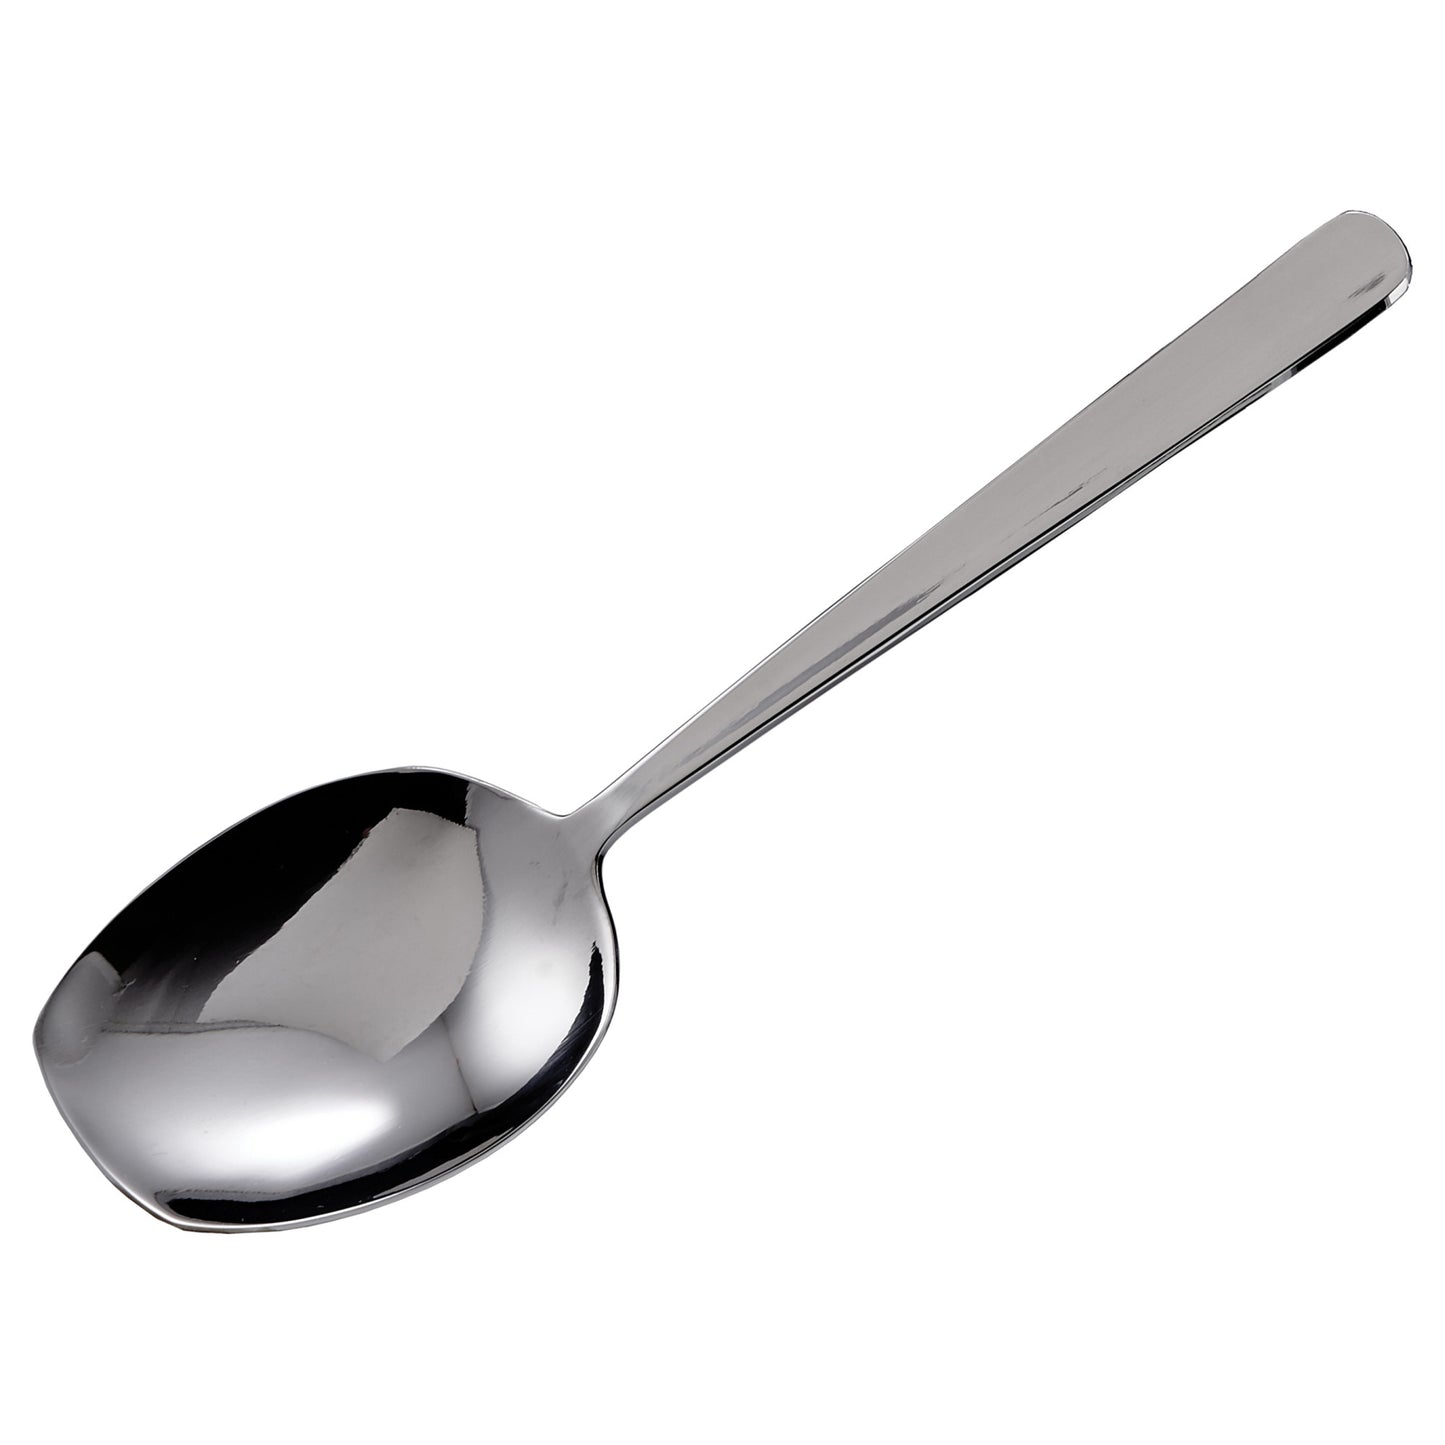 SRS-8 - Serving Spoons, Flat Edge, Stainless Steel